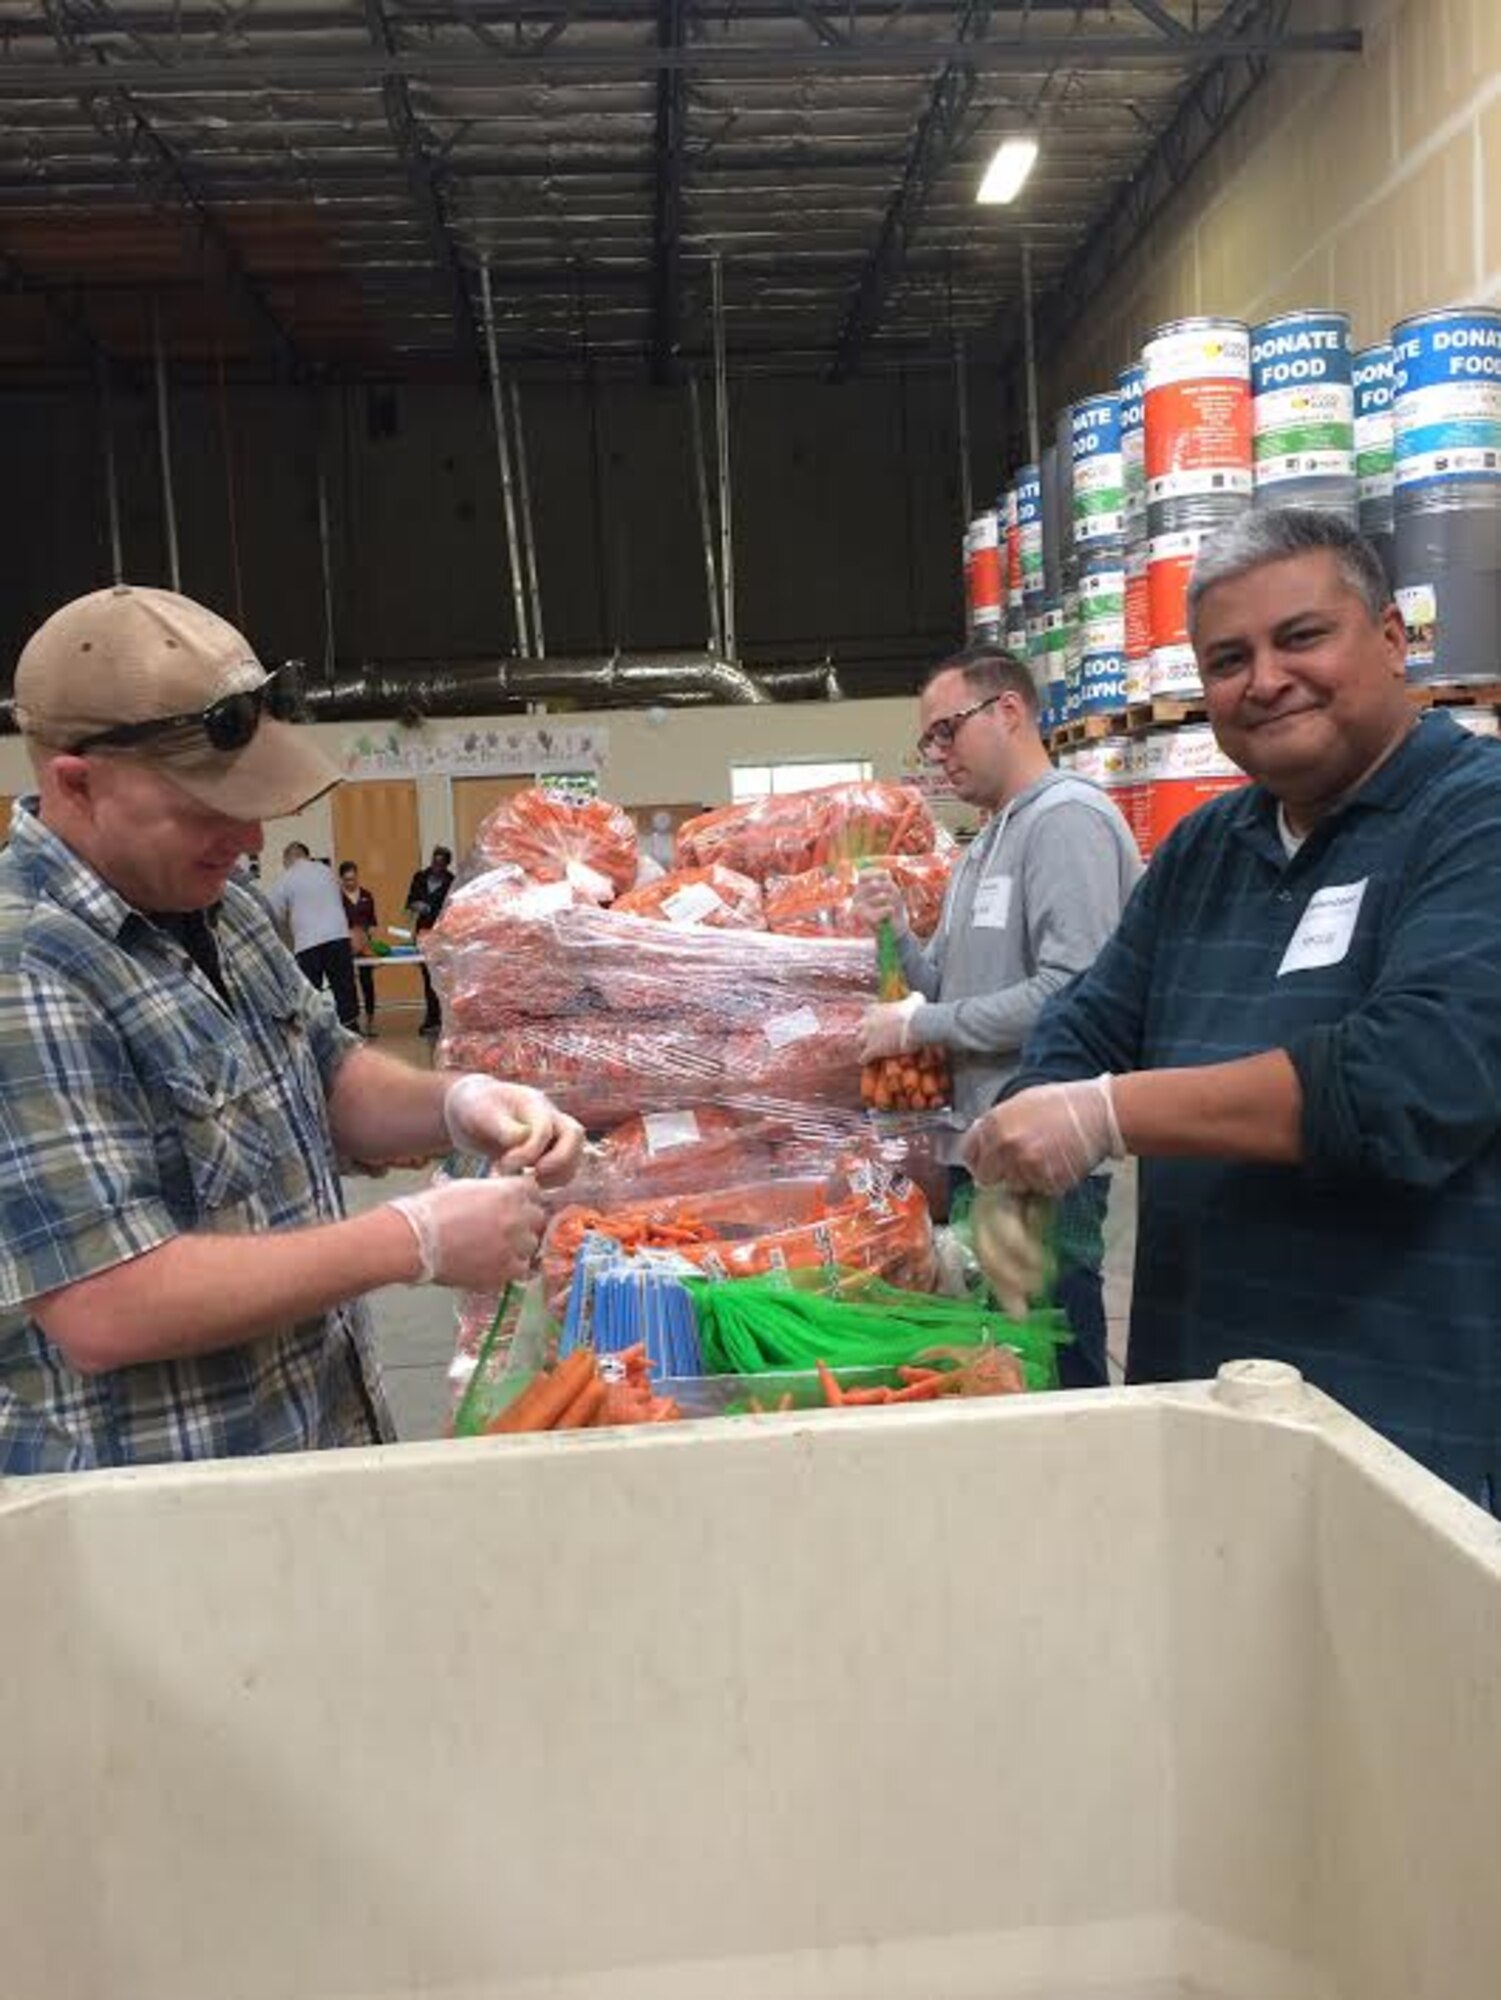 Airmen from the 60th Operations Group at Travis Air Force Base, Calif., help sort and package carrots during a volunteer event at the Solano Food Bank in Fairfield, Calif., March 24, 2017. More than 30 Airmen supported the event and packaged more than 6,700 pounds of food. (Courtesy Photo)